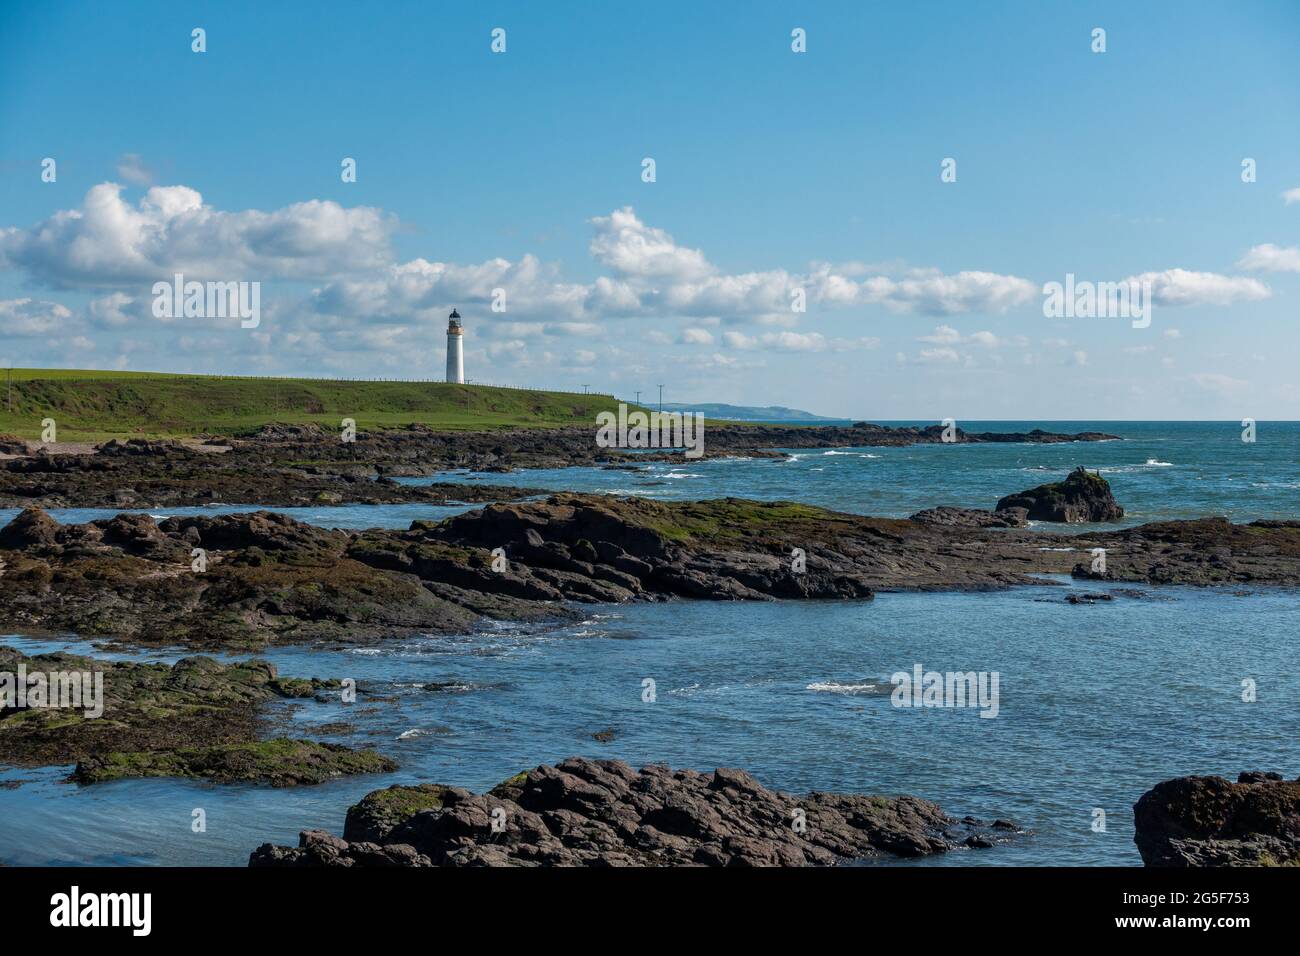 The lighthouse at the rocky headland of Scurdie Ness, Ferryden near Montrose, Scotland Stock Photo